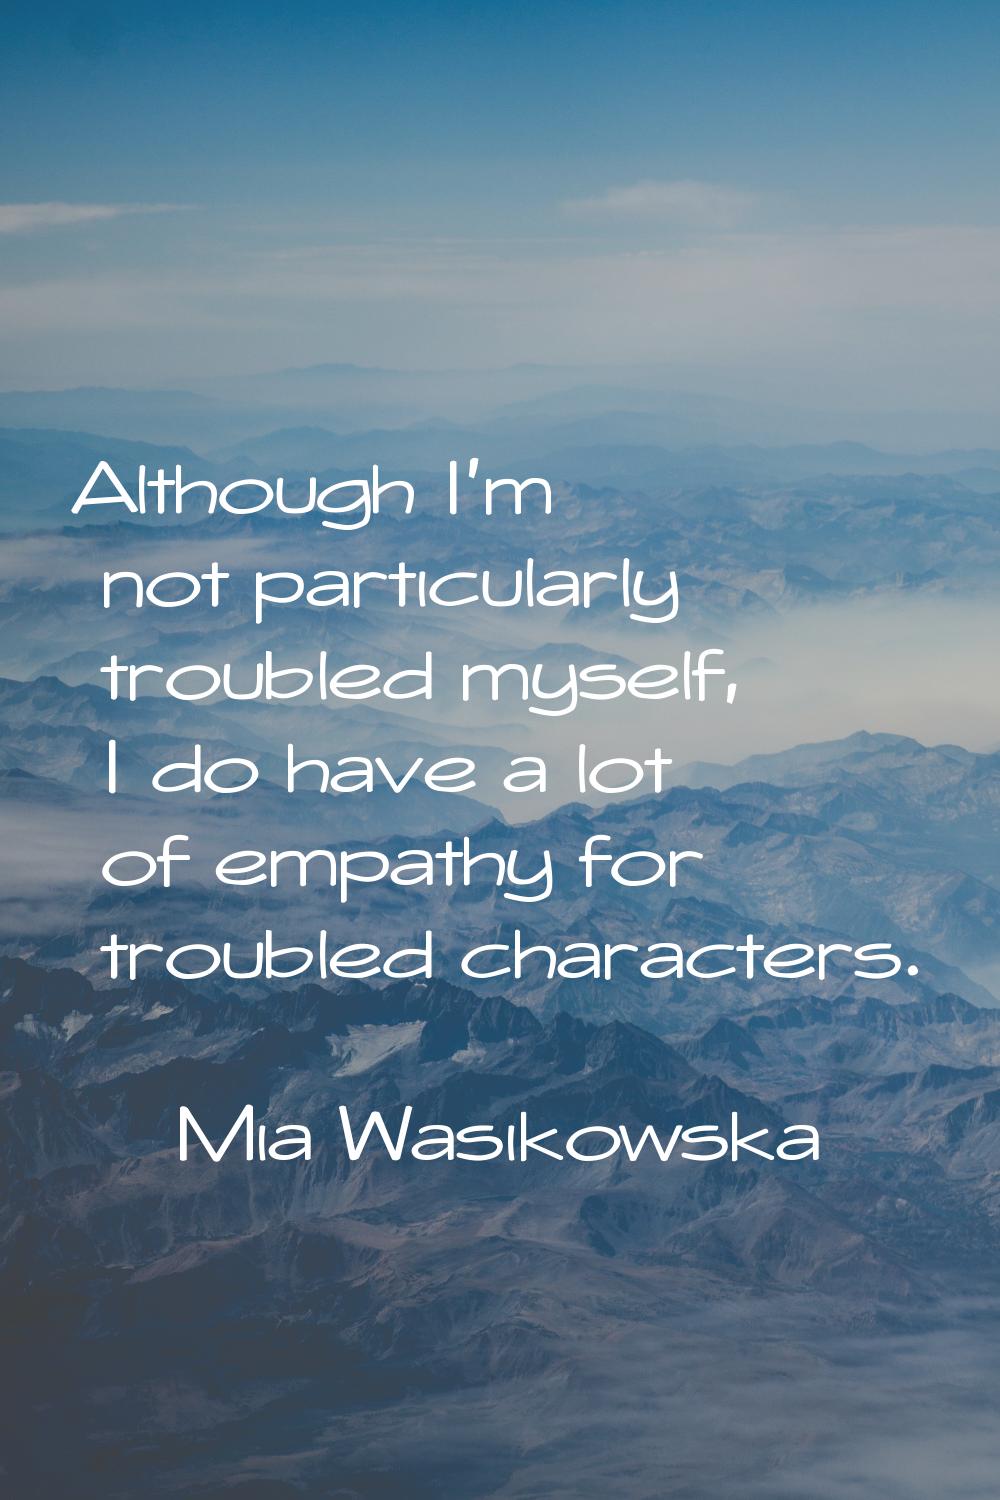 Although I'm not particularly troubled myself, I do have a lot of empathy for troubled characters.